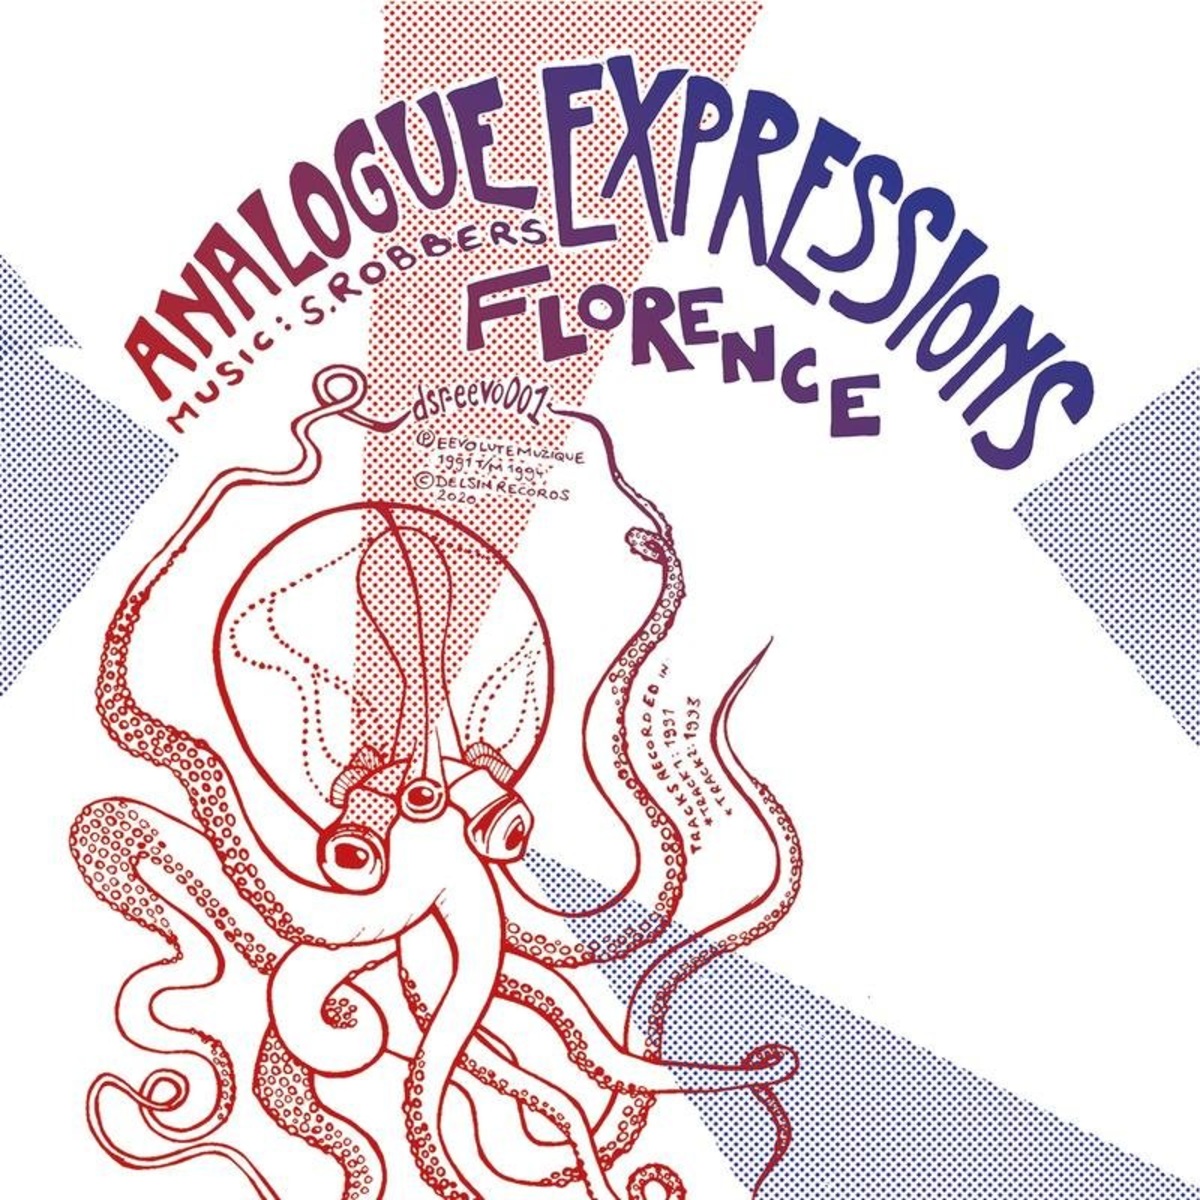 Download Analogue Expressions on Electrobuzz